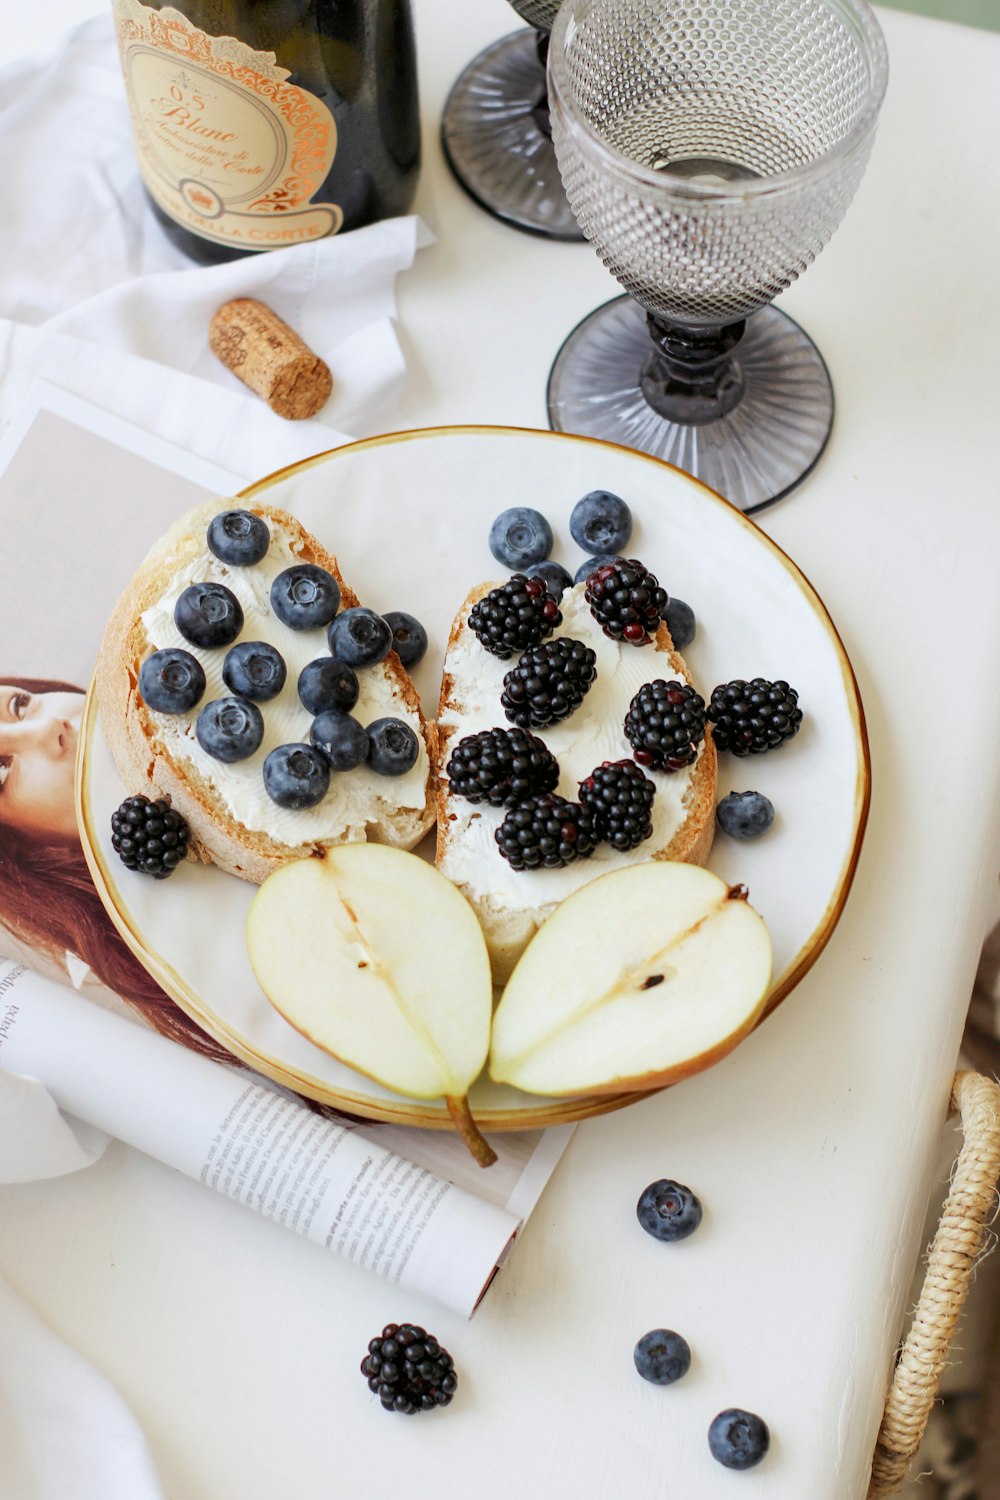 sliced of banana and blue berries on white ceramic plate